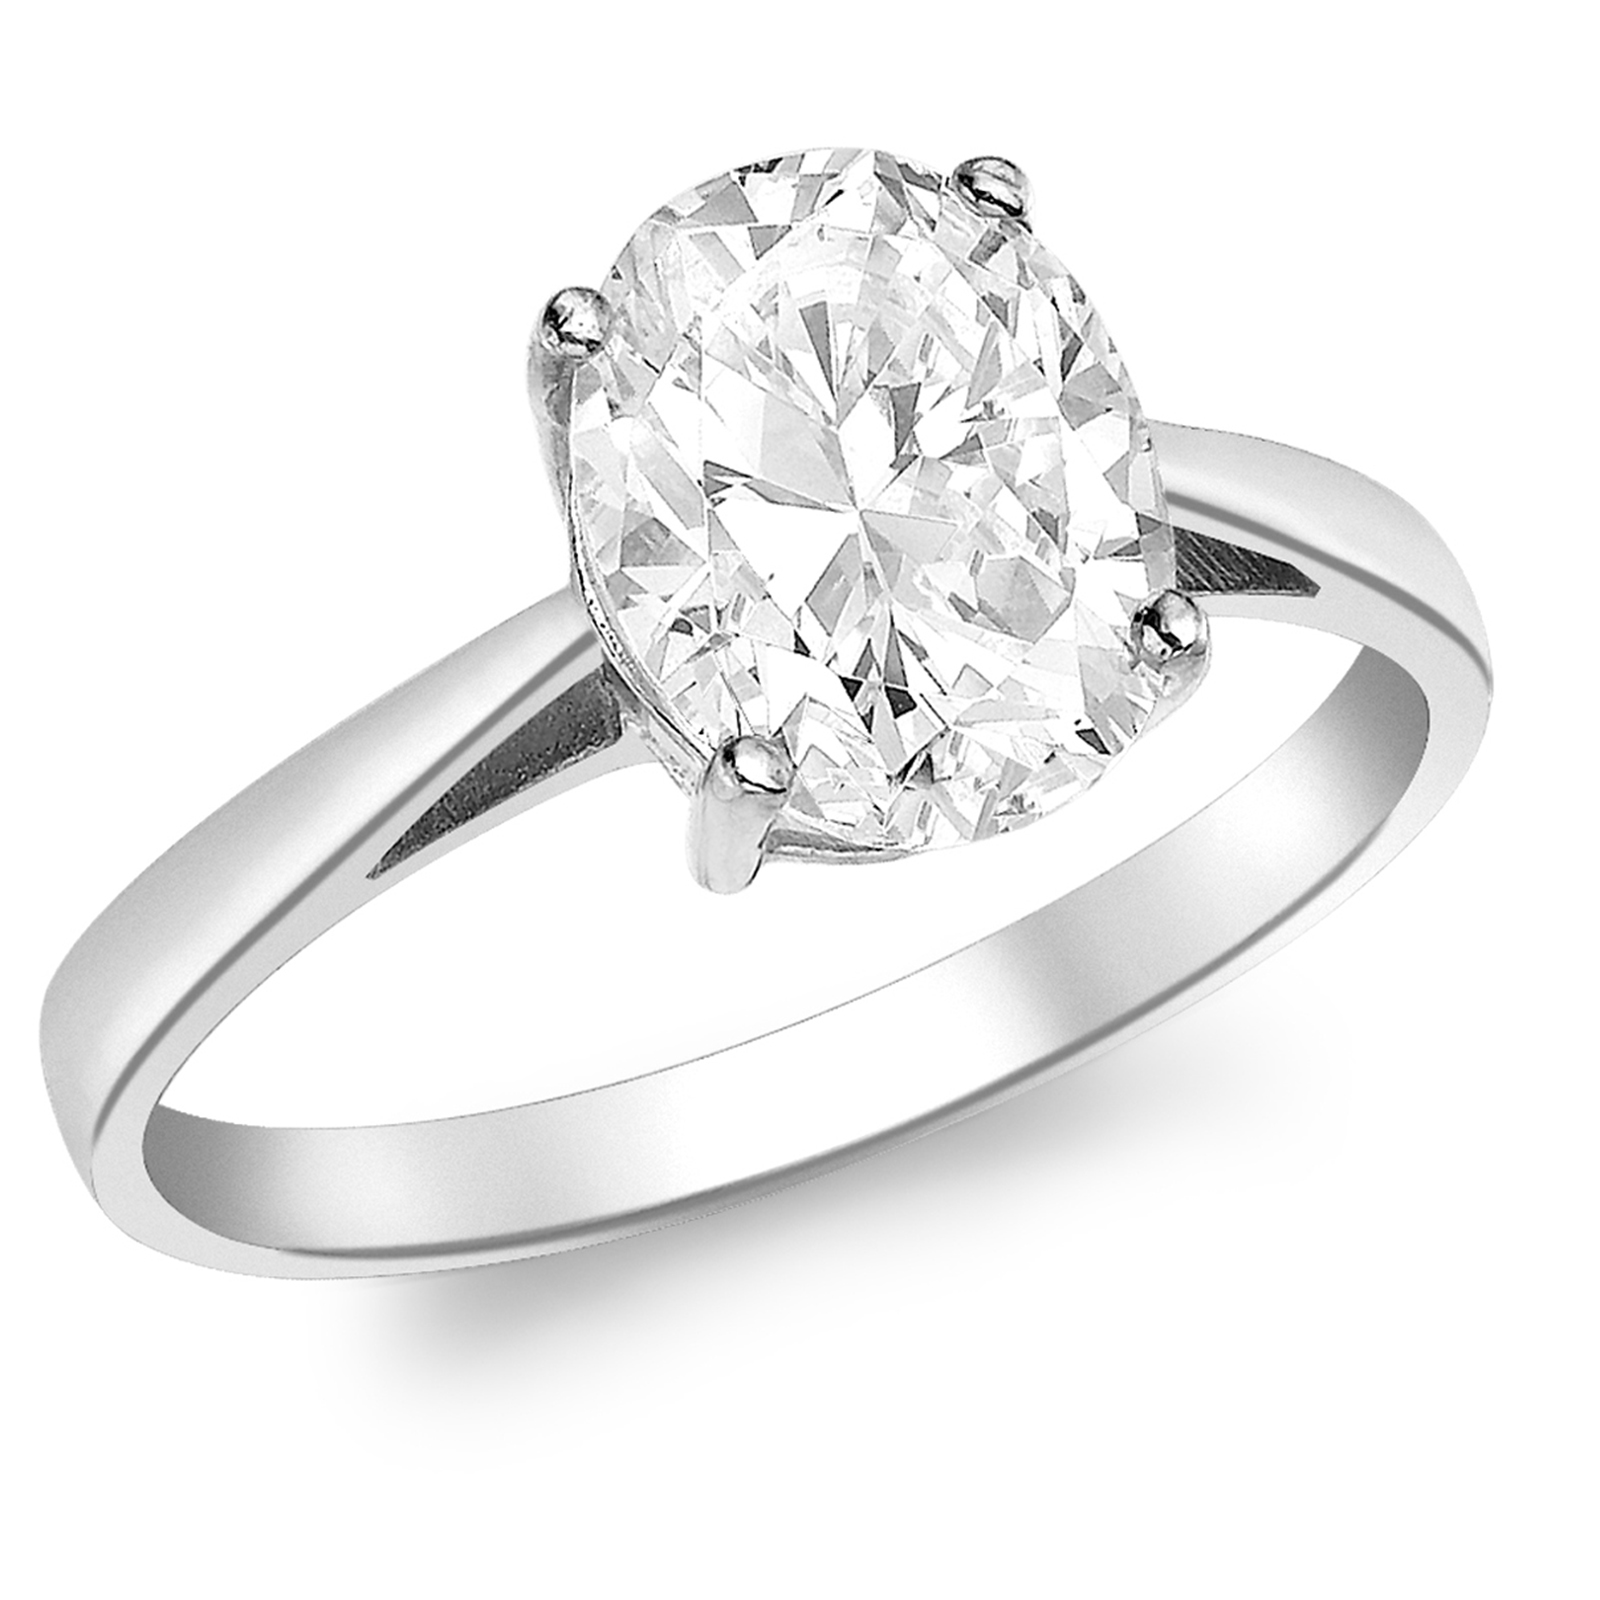 9ct White Gold Oval Cubic Zirconia Solitaire Ring | Rings | Jewellery ...